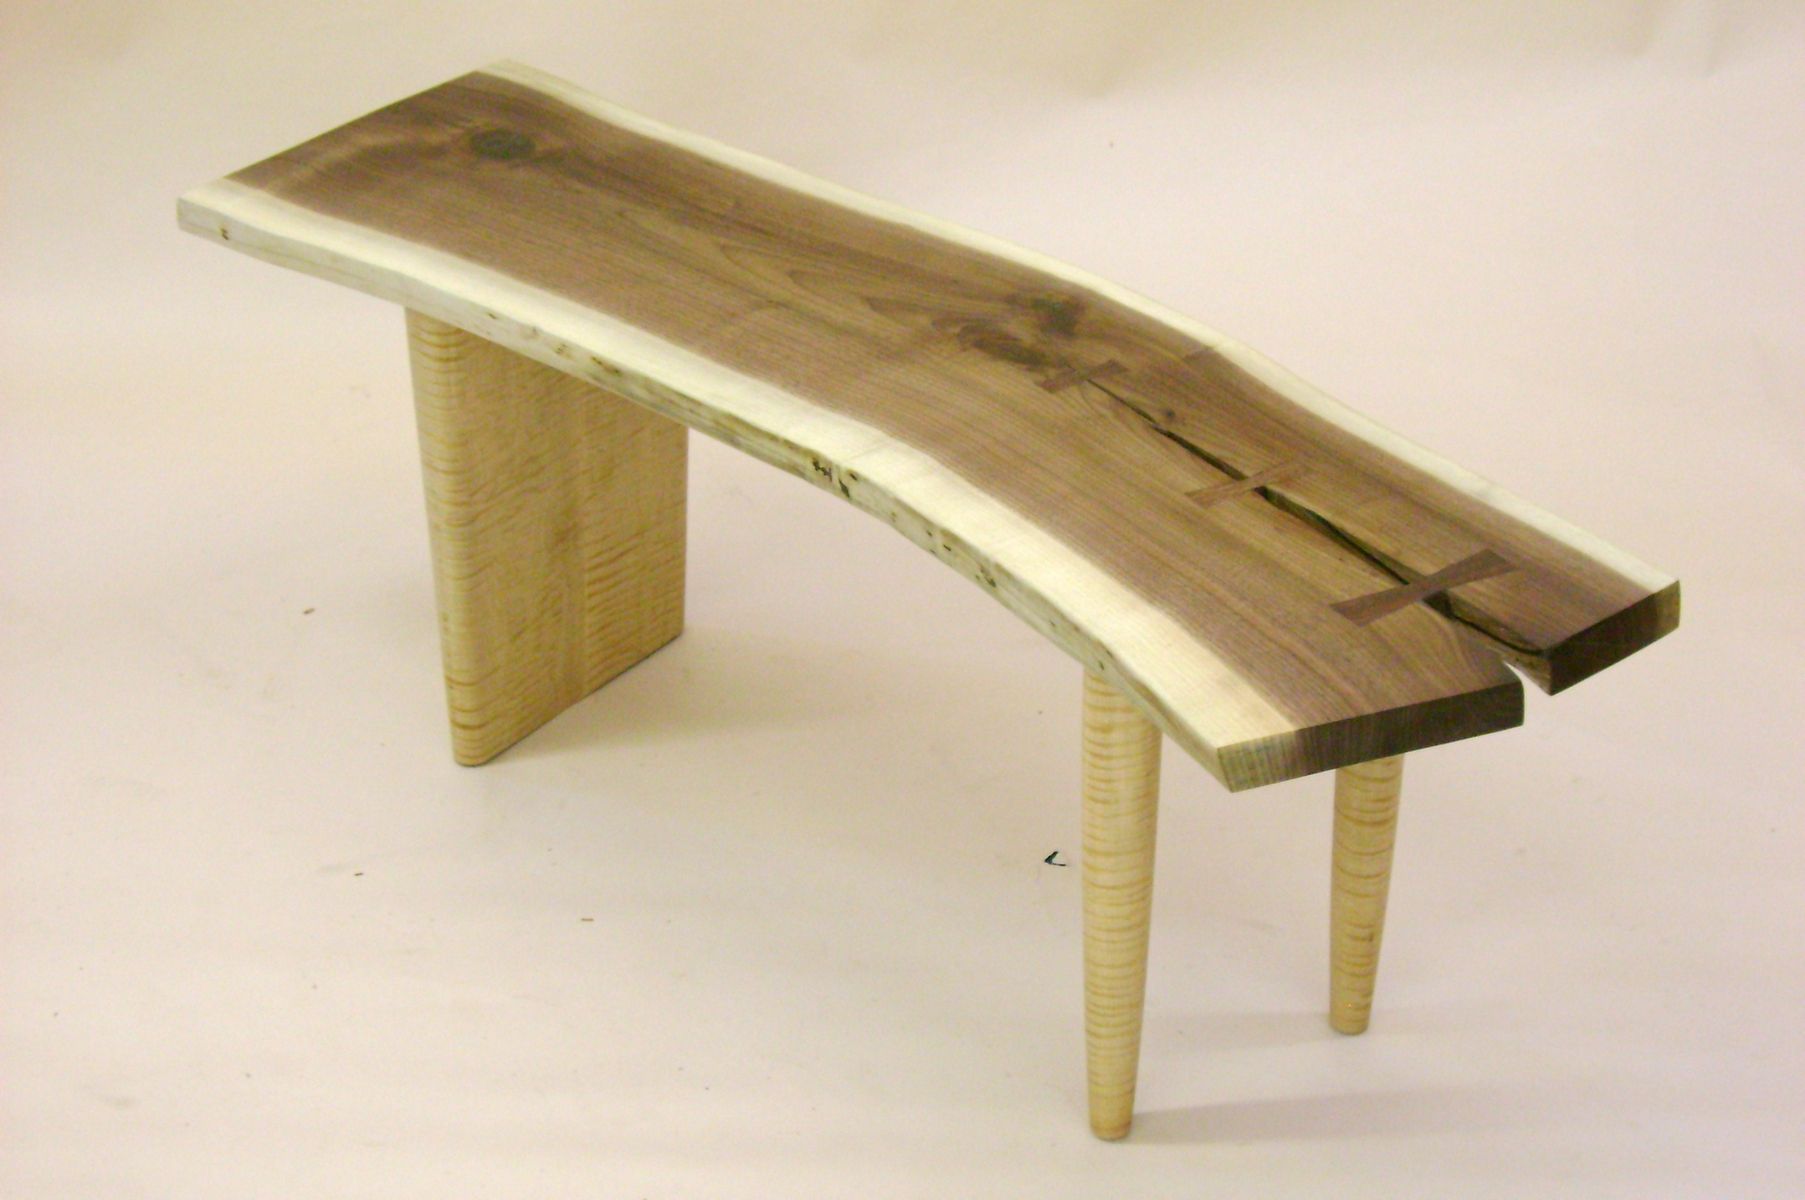 Custom Made Free Form Bench by Sterling Woodworking | CustomMade.com